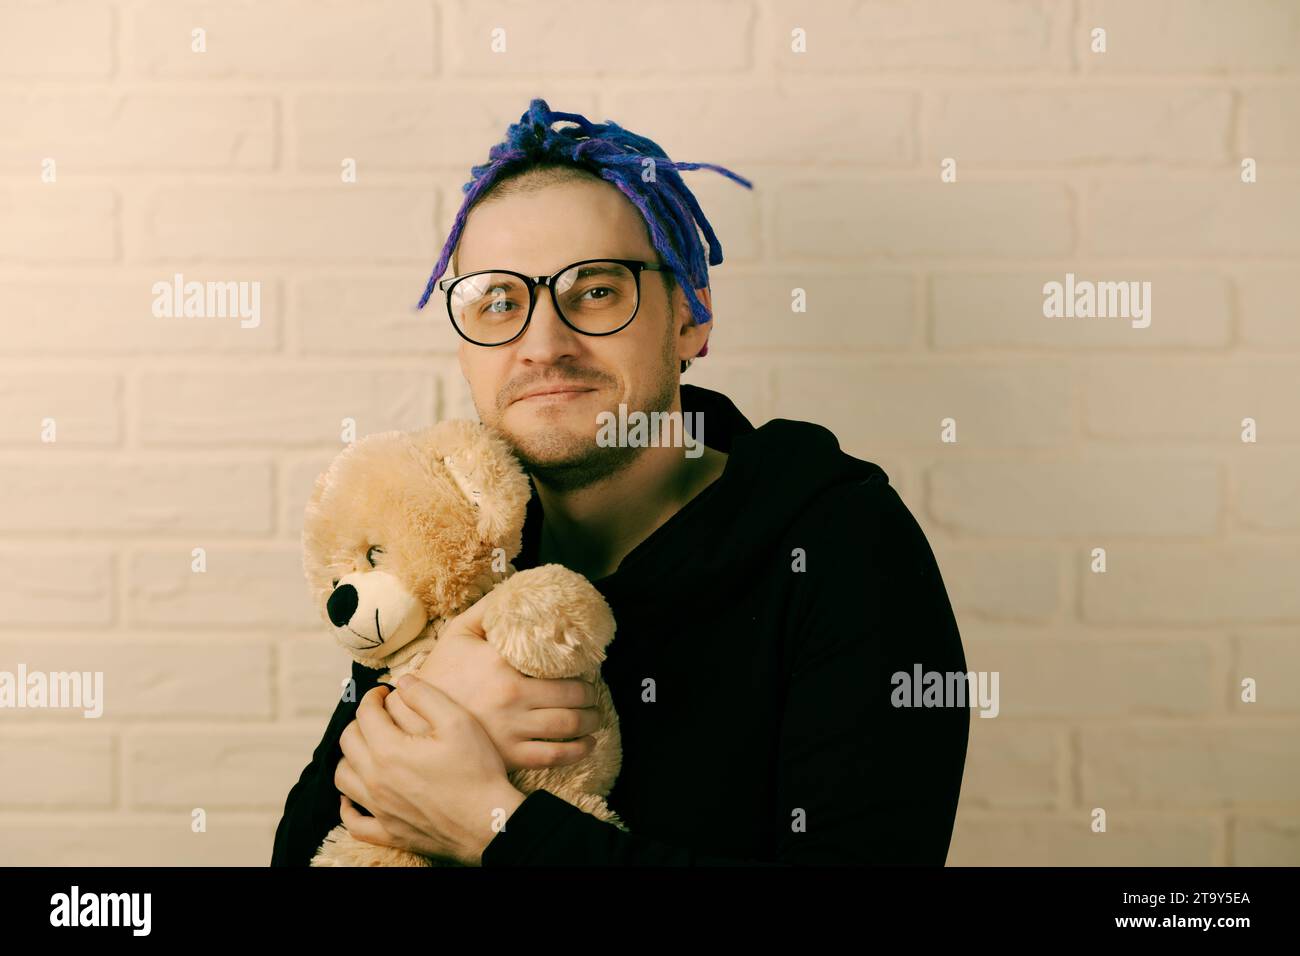 The Tender Embrace: A Man with Dreadlocks with Glasses Cherishing a Plush Toy. Stock Photo